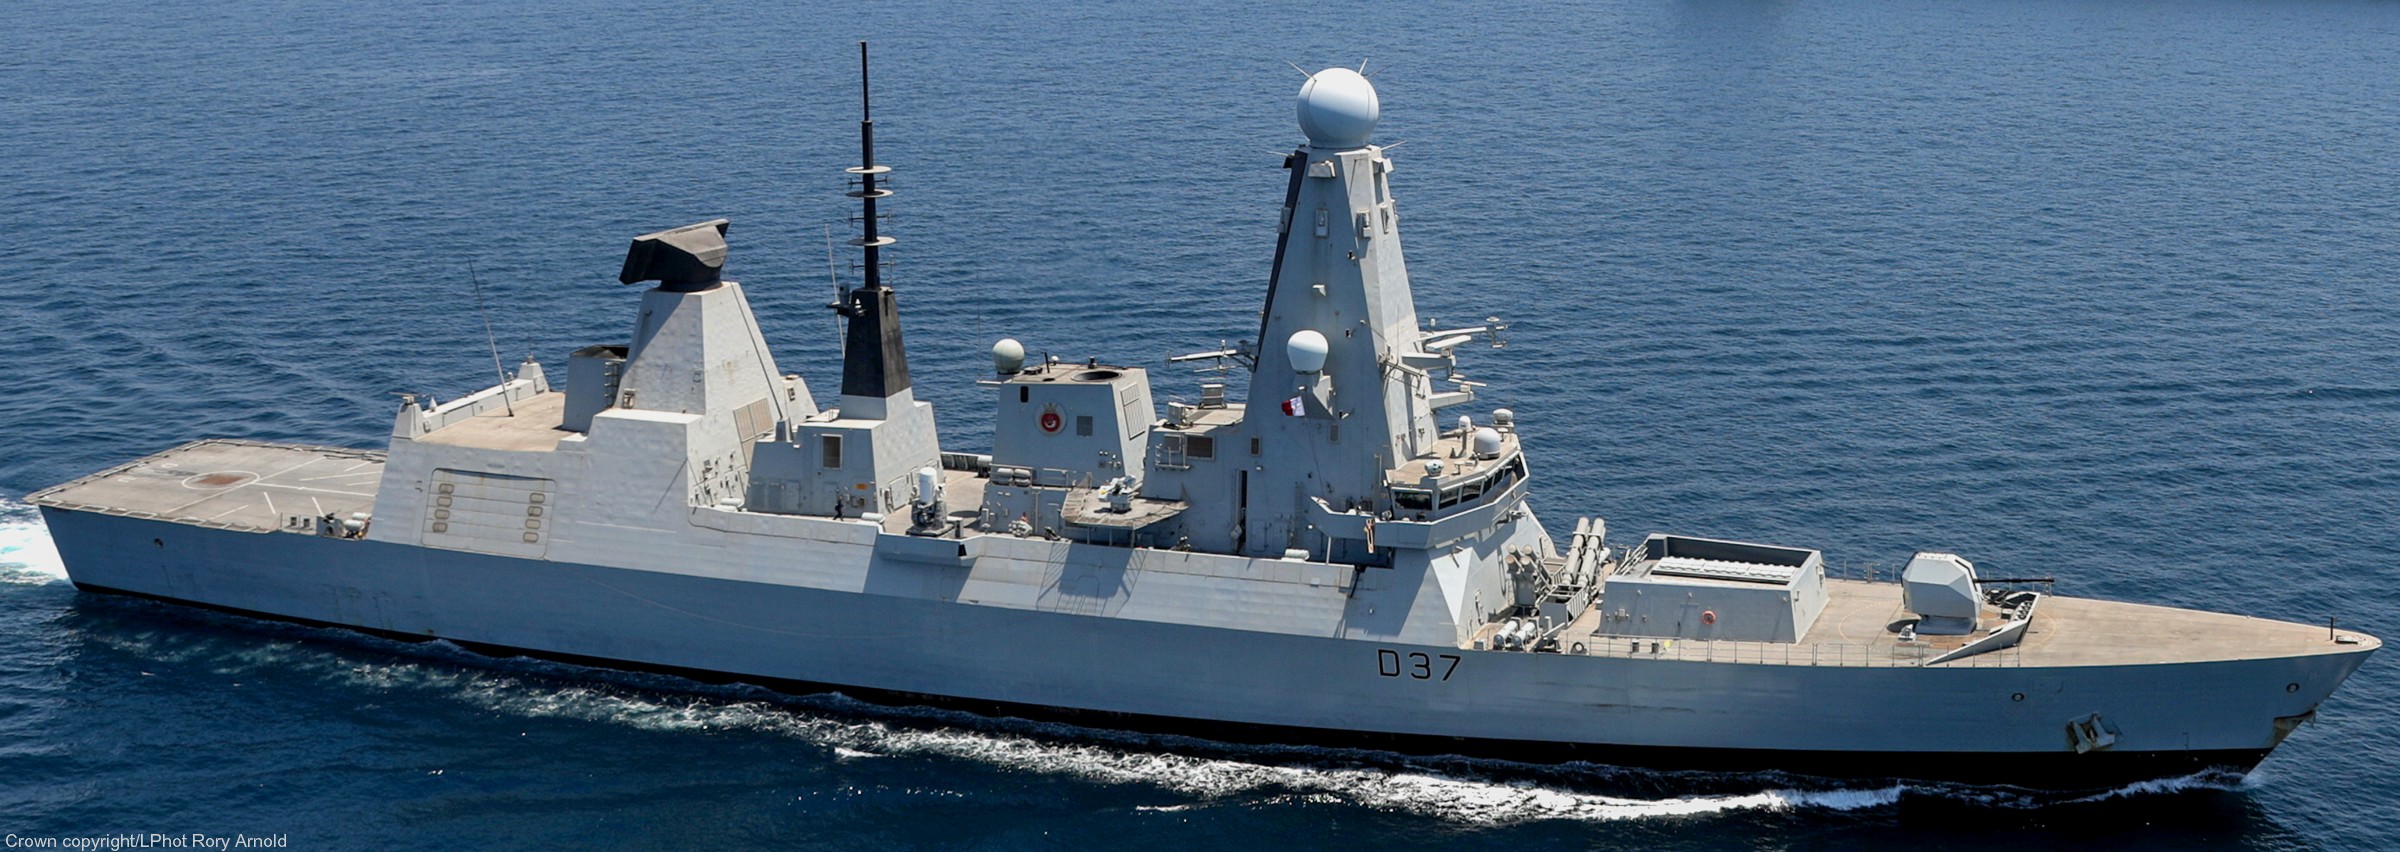 d37 hms duncan d-37 type 45 daring class guided missile destroyer ddg royal navy sea viper 63